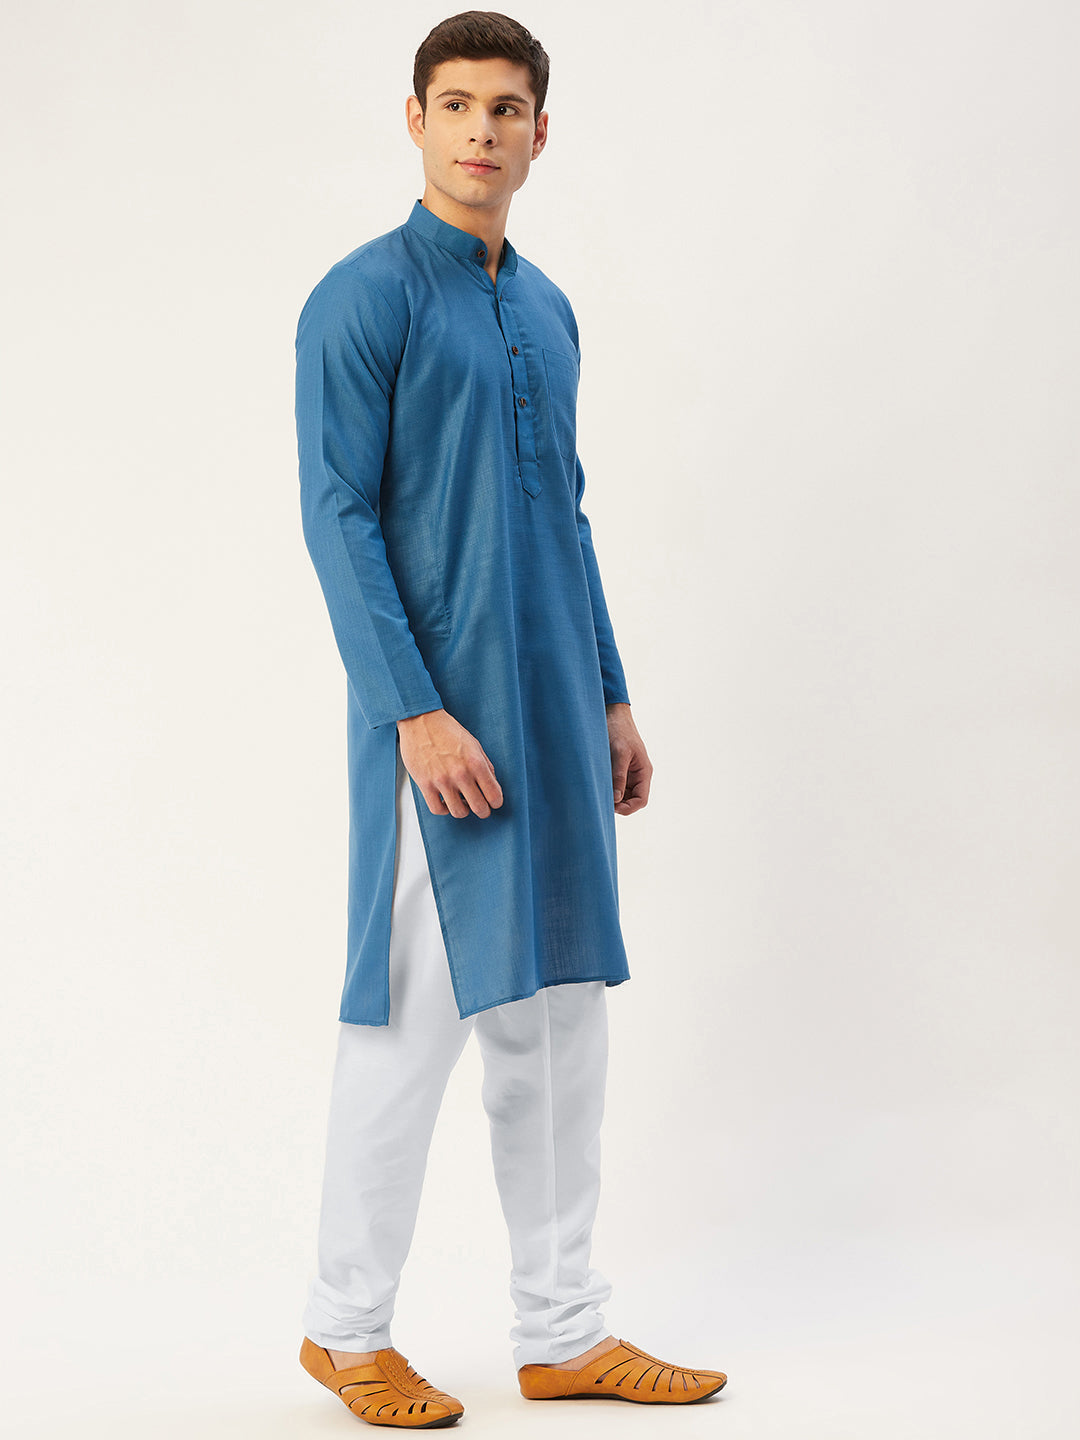 Jompers Men's peacock Cotton Solid Kurta Only